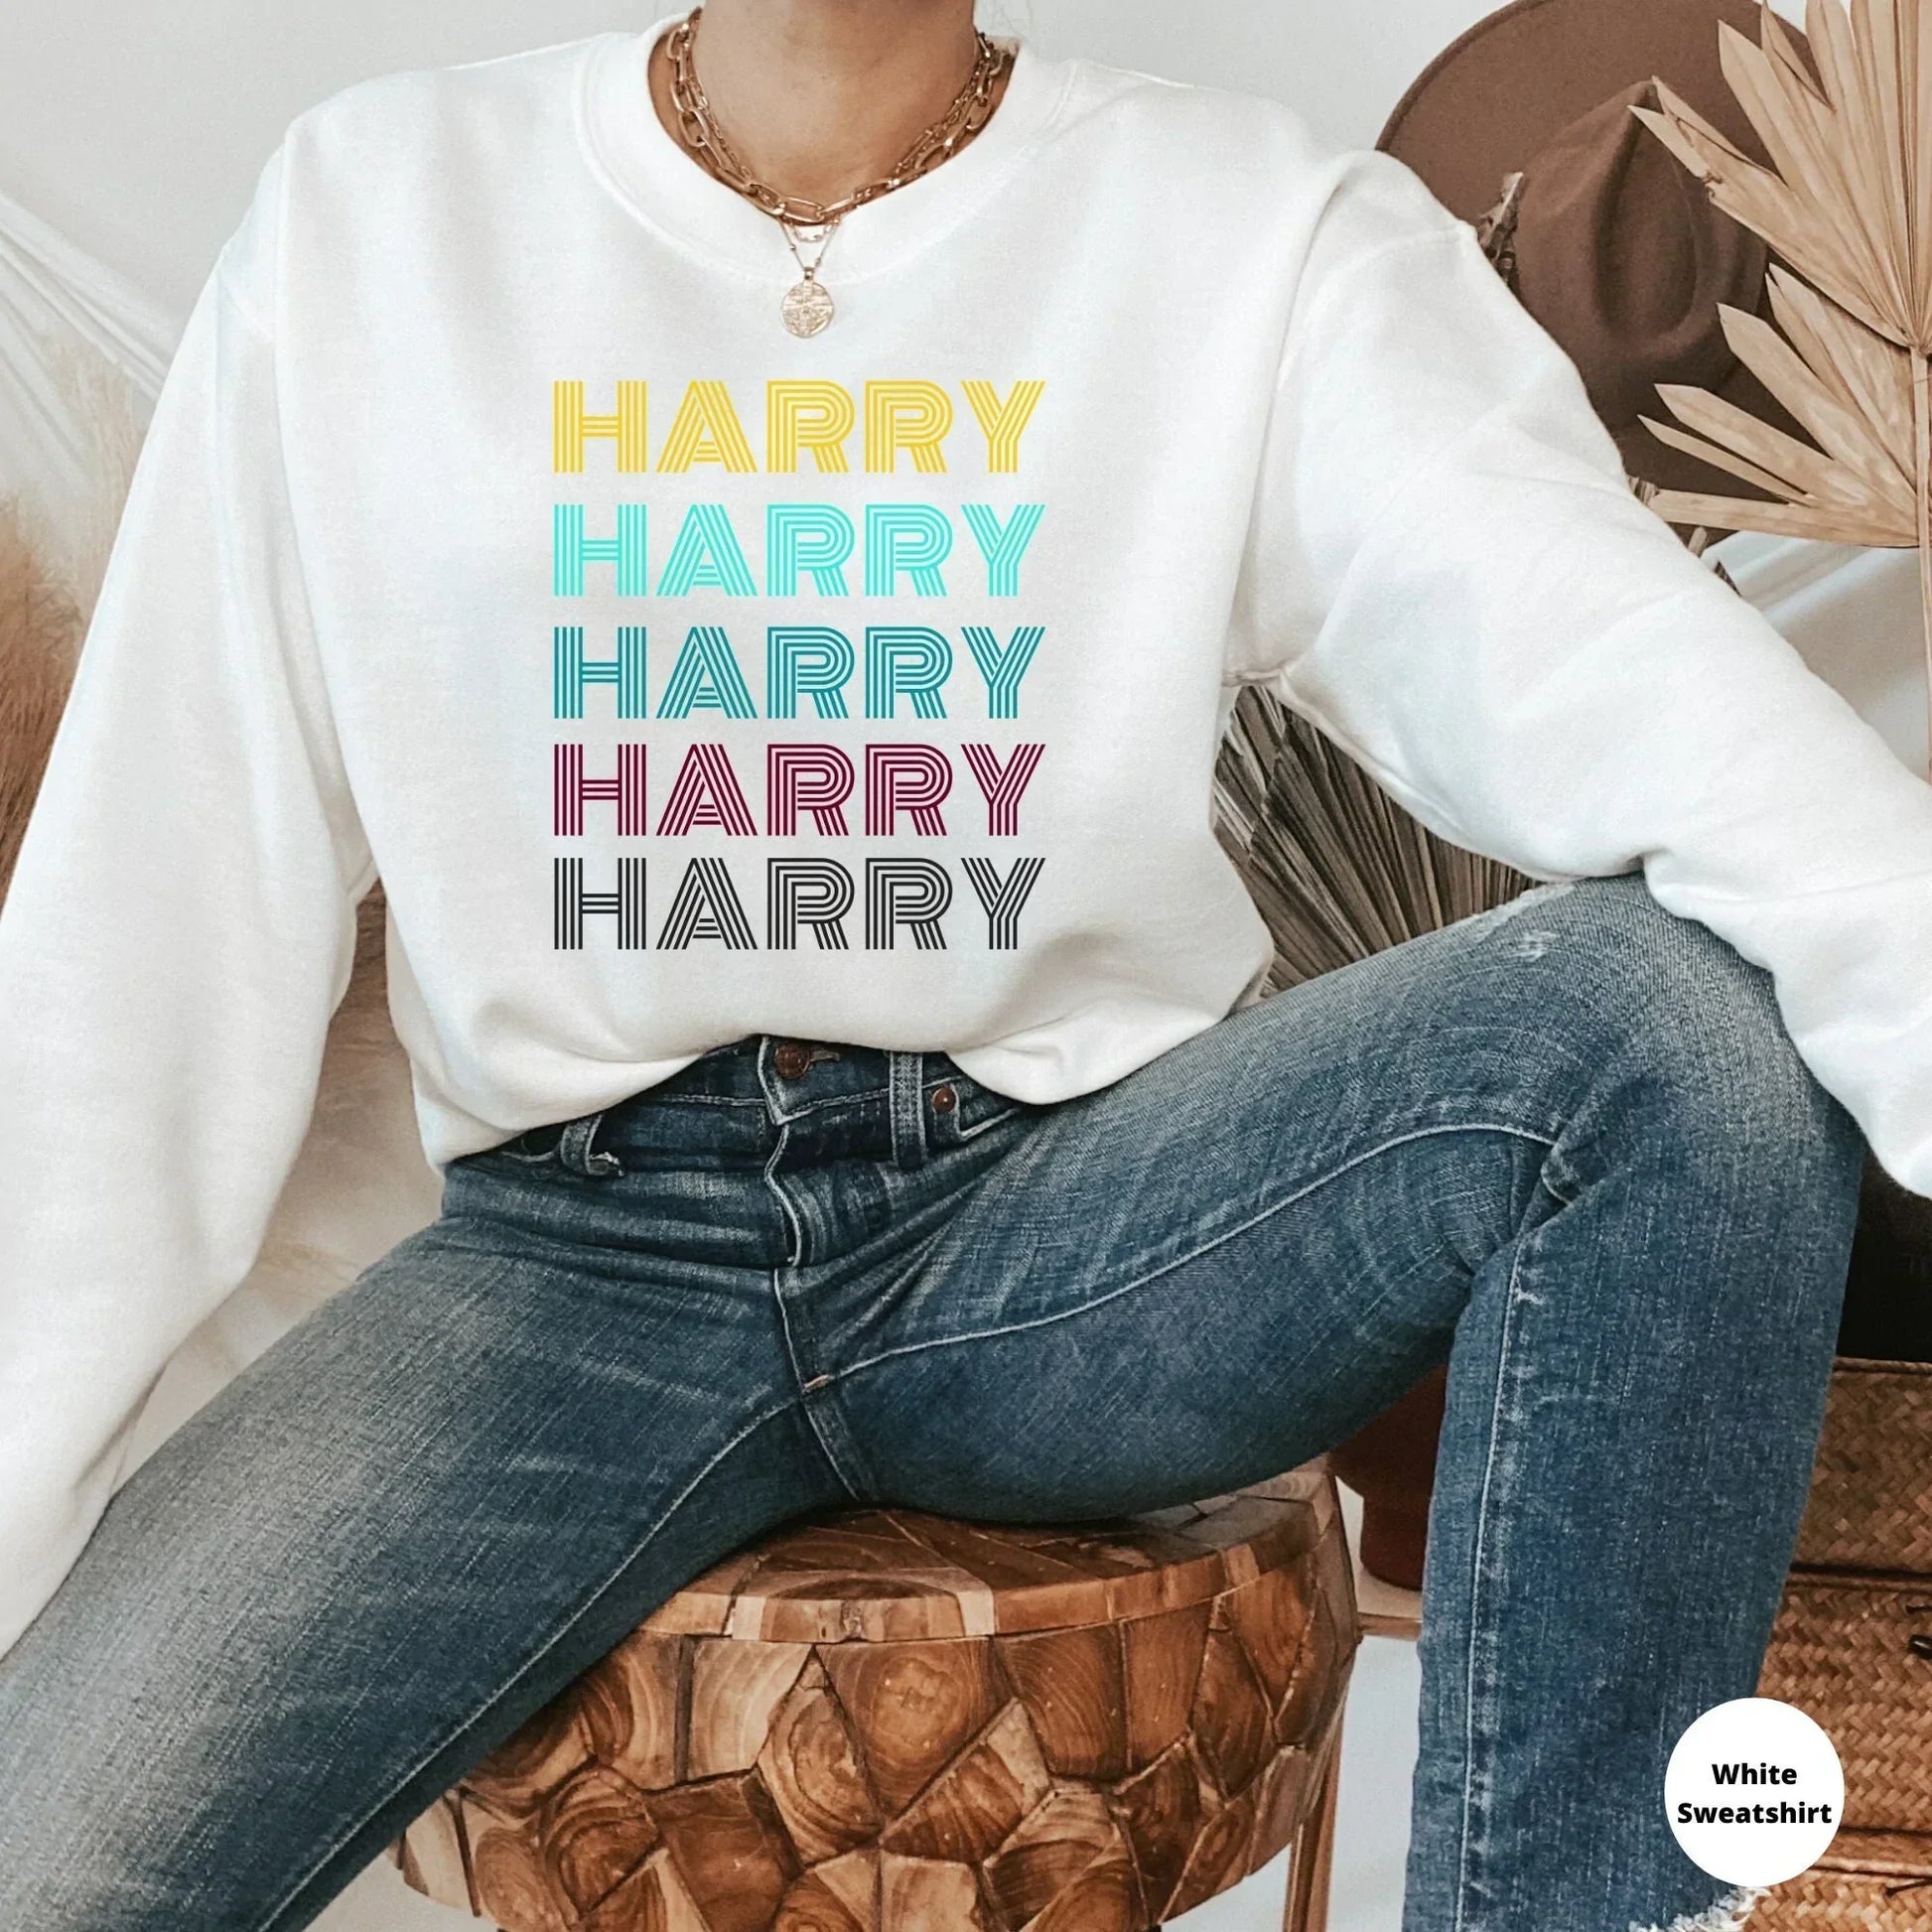 Retro Harry Shirt, Treat People With Kindness, Harry Styles Shirt, Fine Line Shirt, Kindness Sweatshirt for Women, One Direction Hoodie